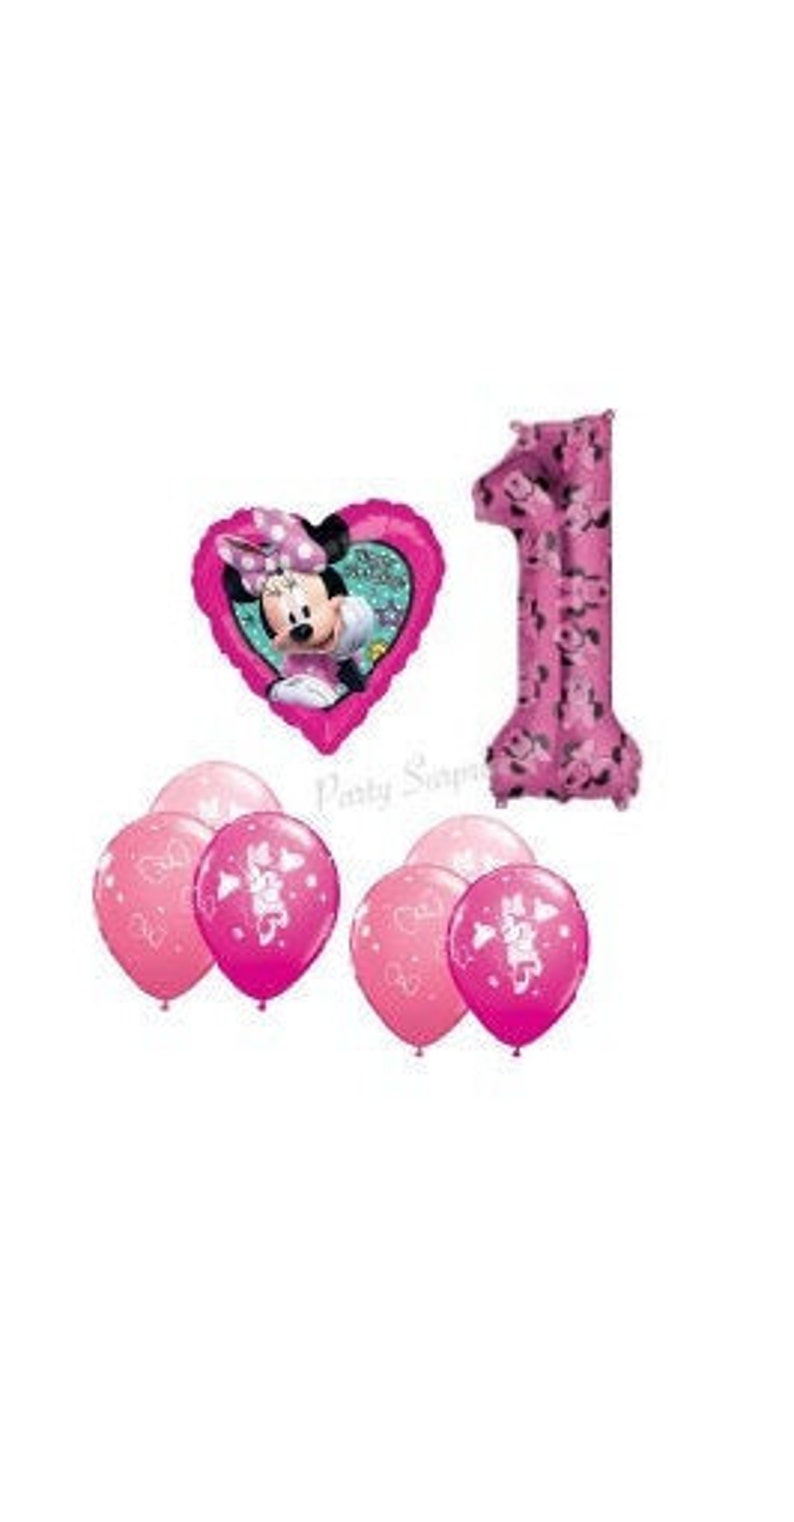 Minnie Mouse 1st Birthday Balloon Package Jumbo Number 1 Minnie Mylar Foil Select Your Pkg Made in USA Girl 1st Birthday Party Balloons image 1